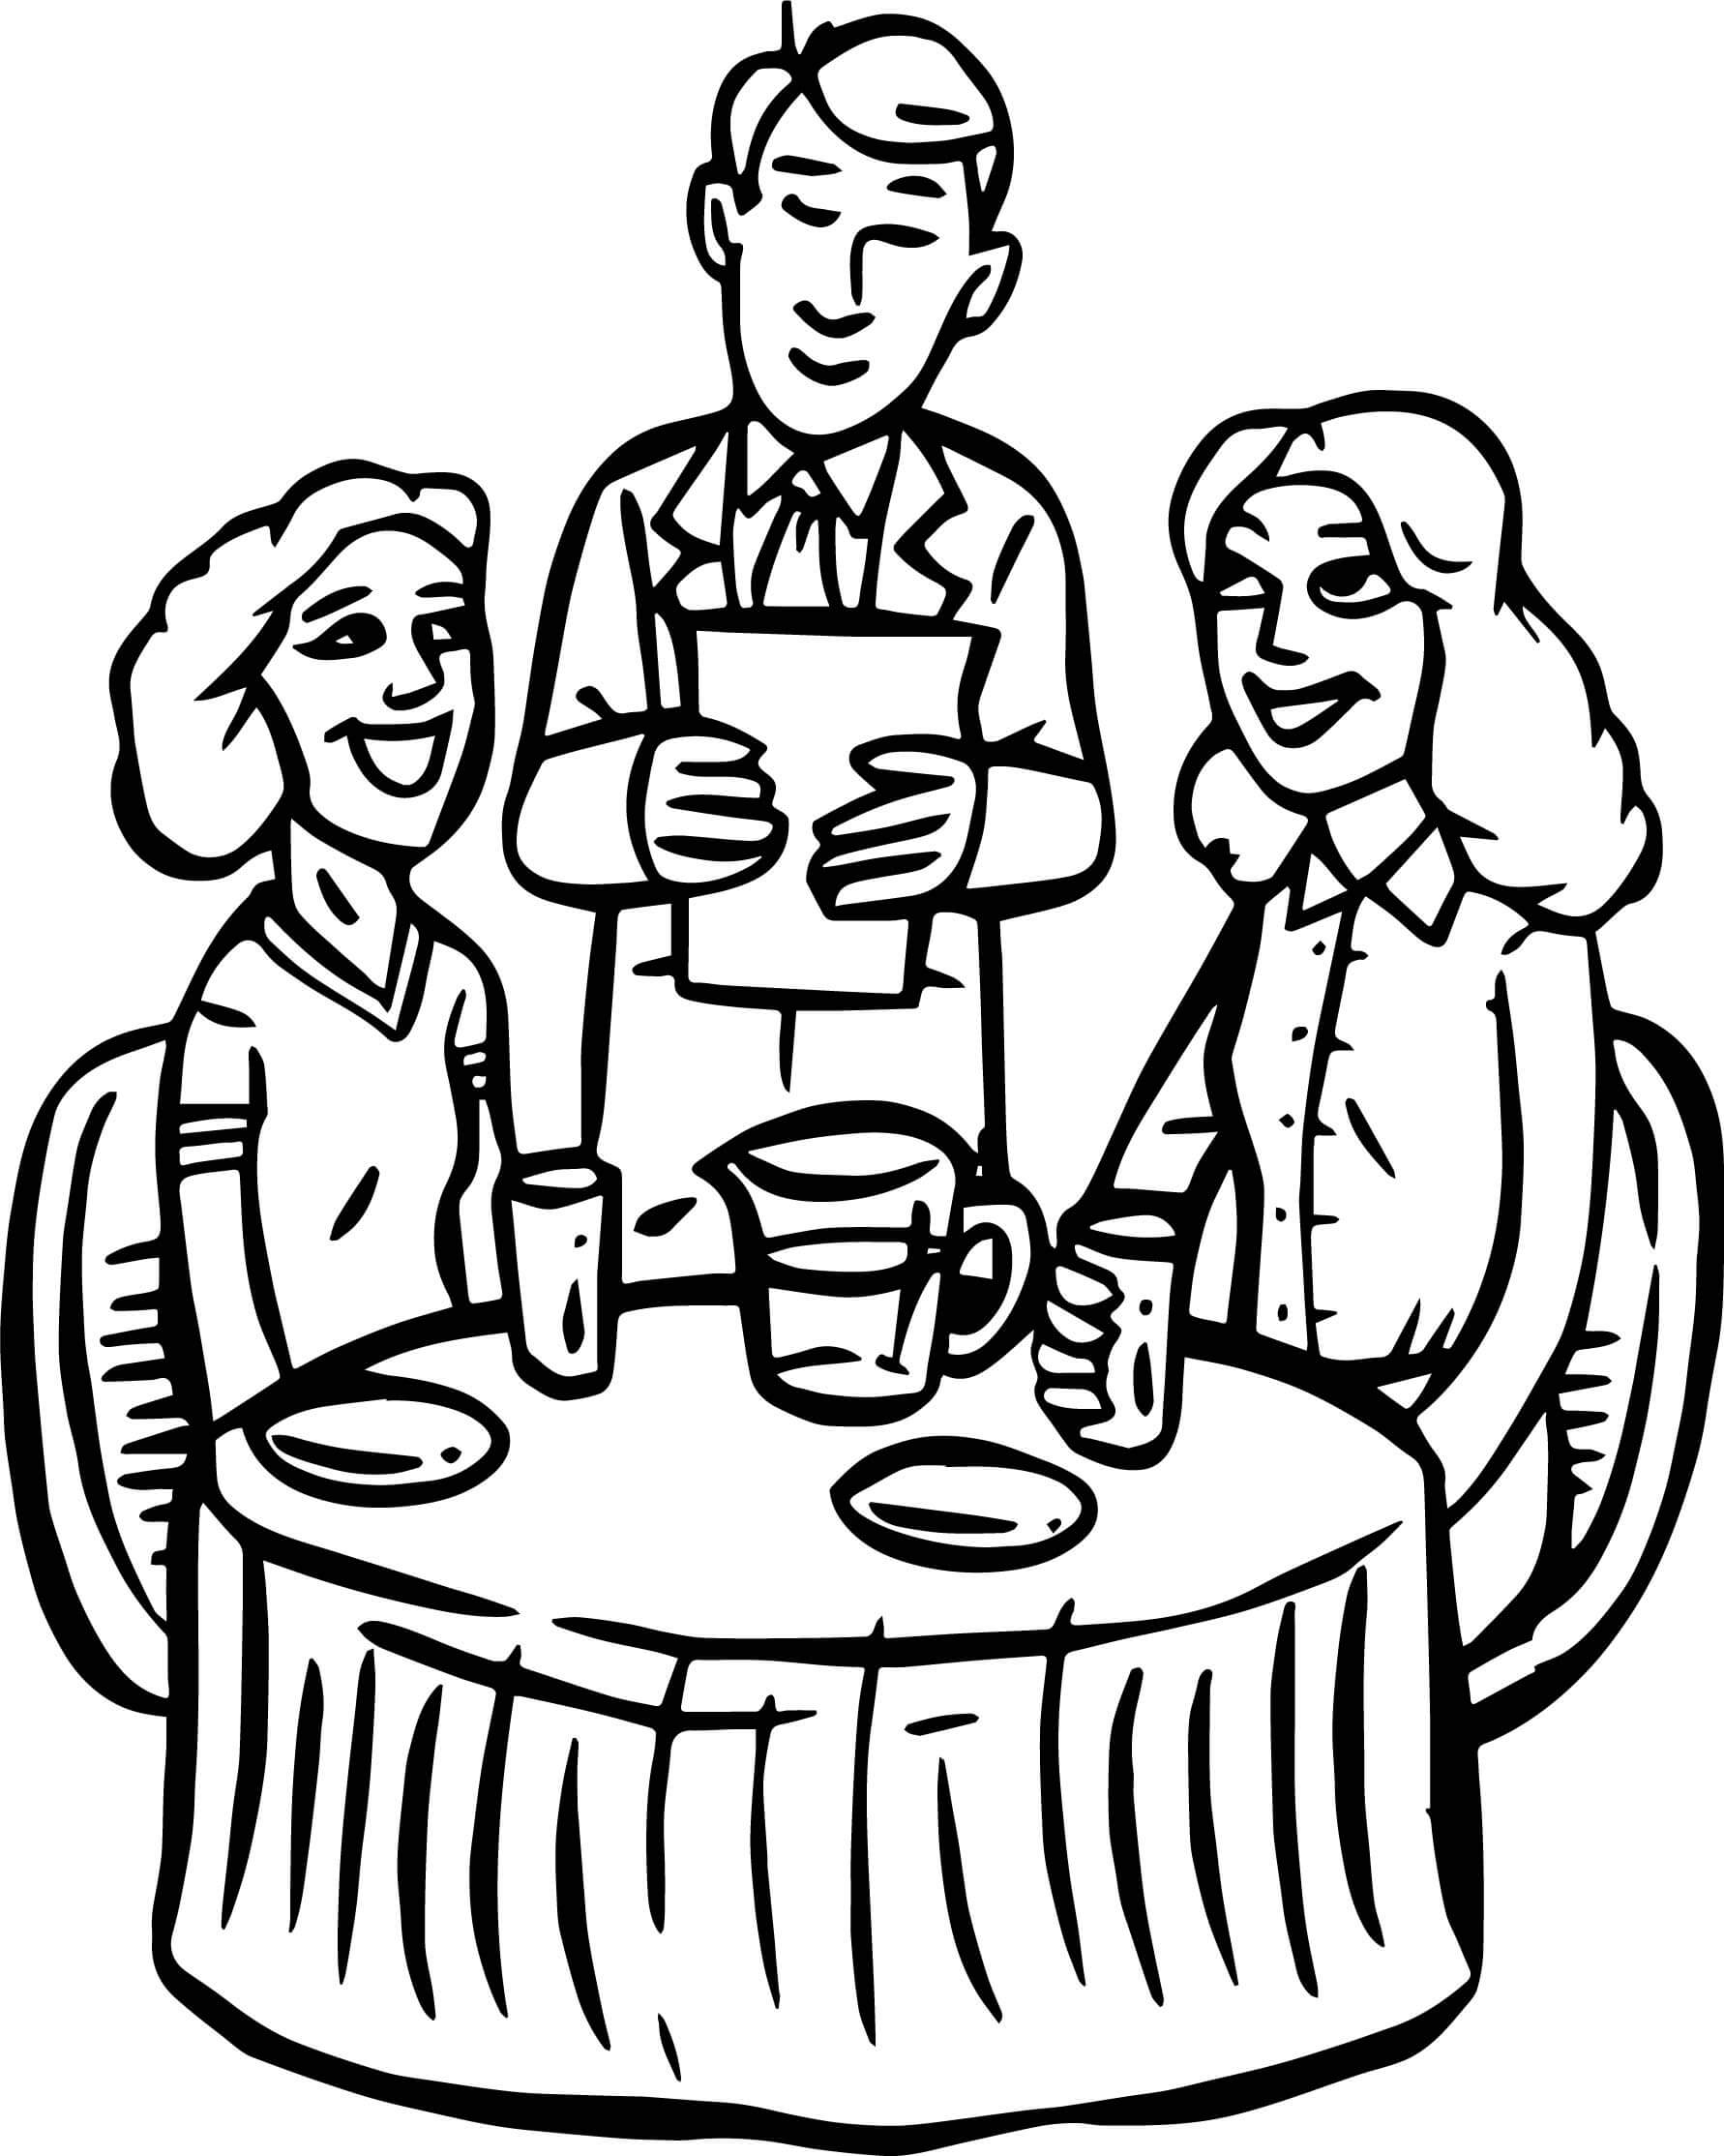 Restaurant Waiter Coloring Pages